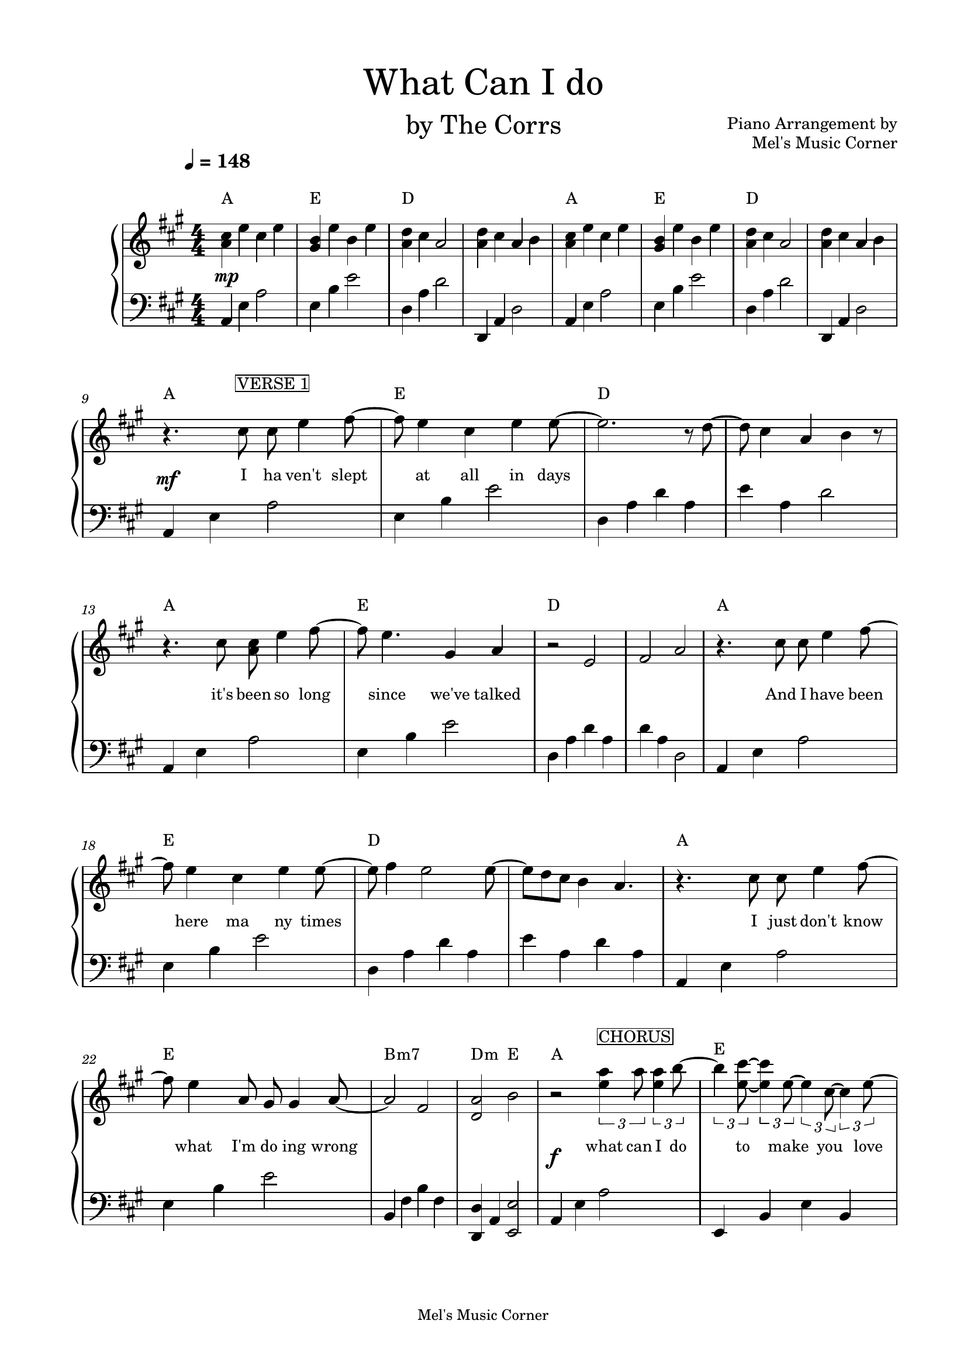 the-corrs-what-can-i-do-piano-sheet-music-lembar-musik-by-mel-s